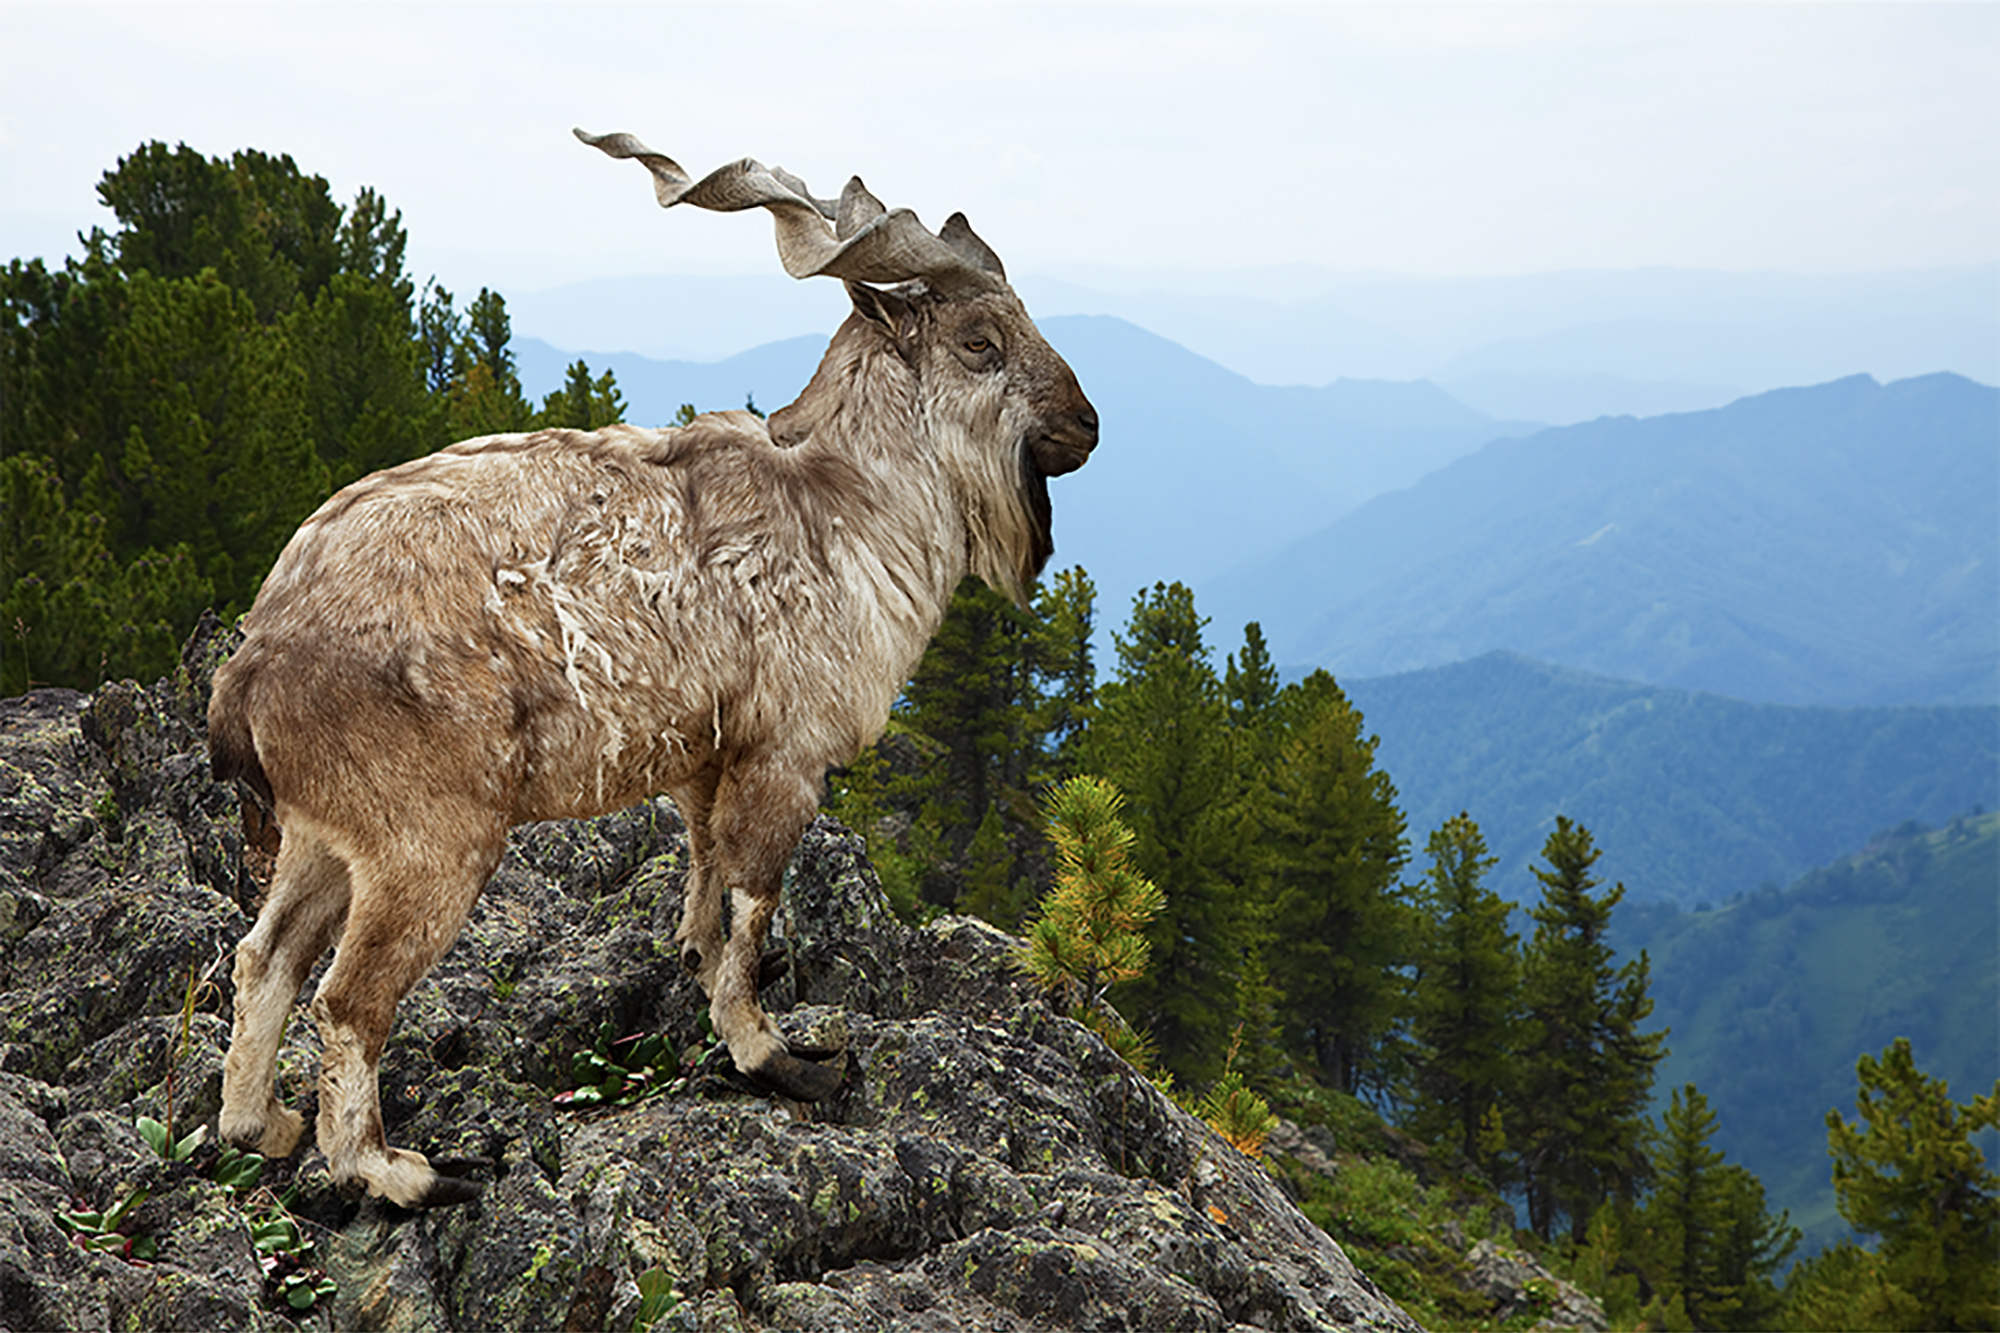 Markhor with mountains in the background.